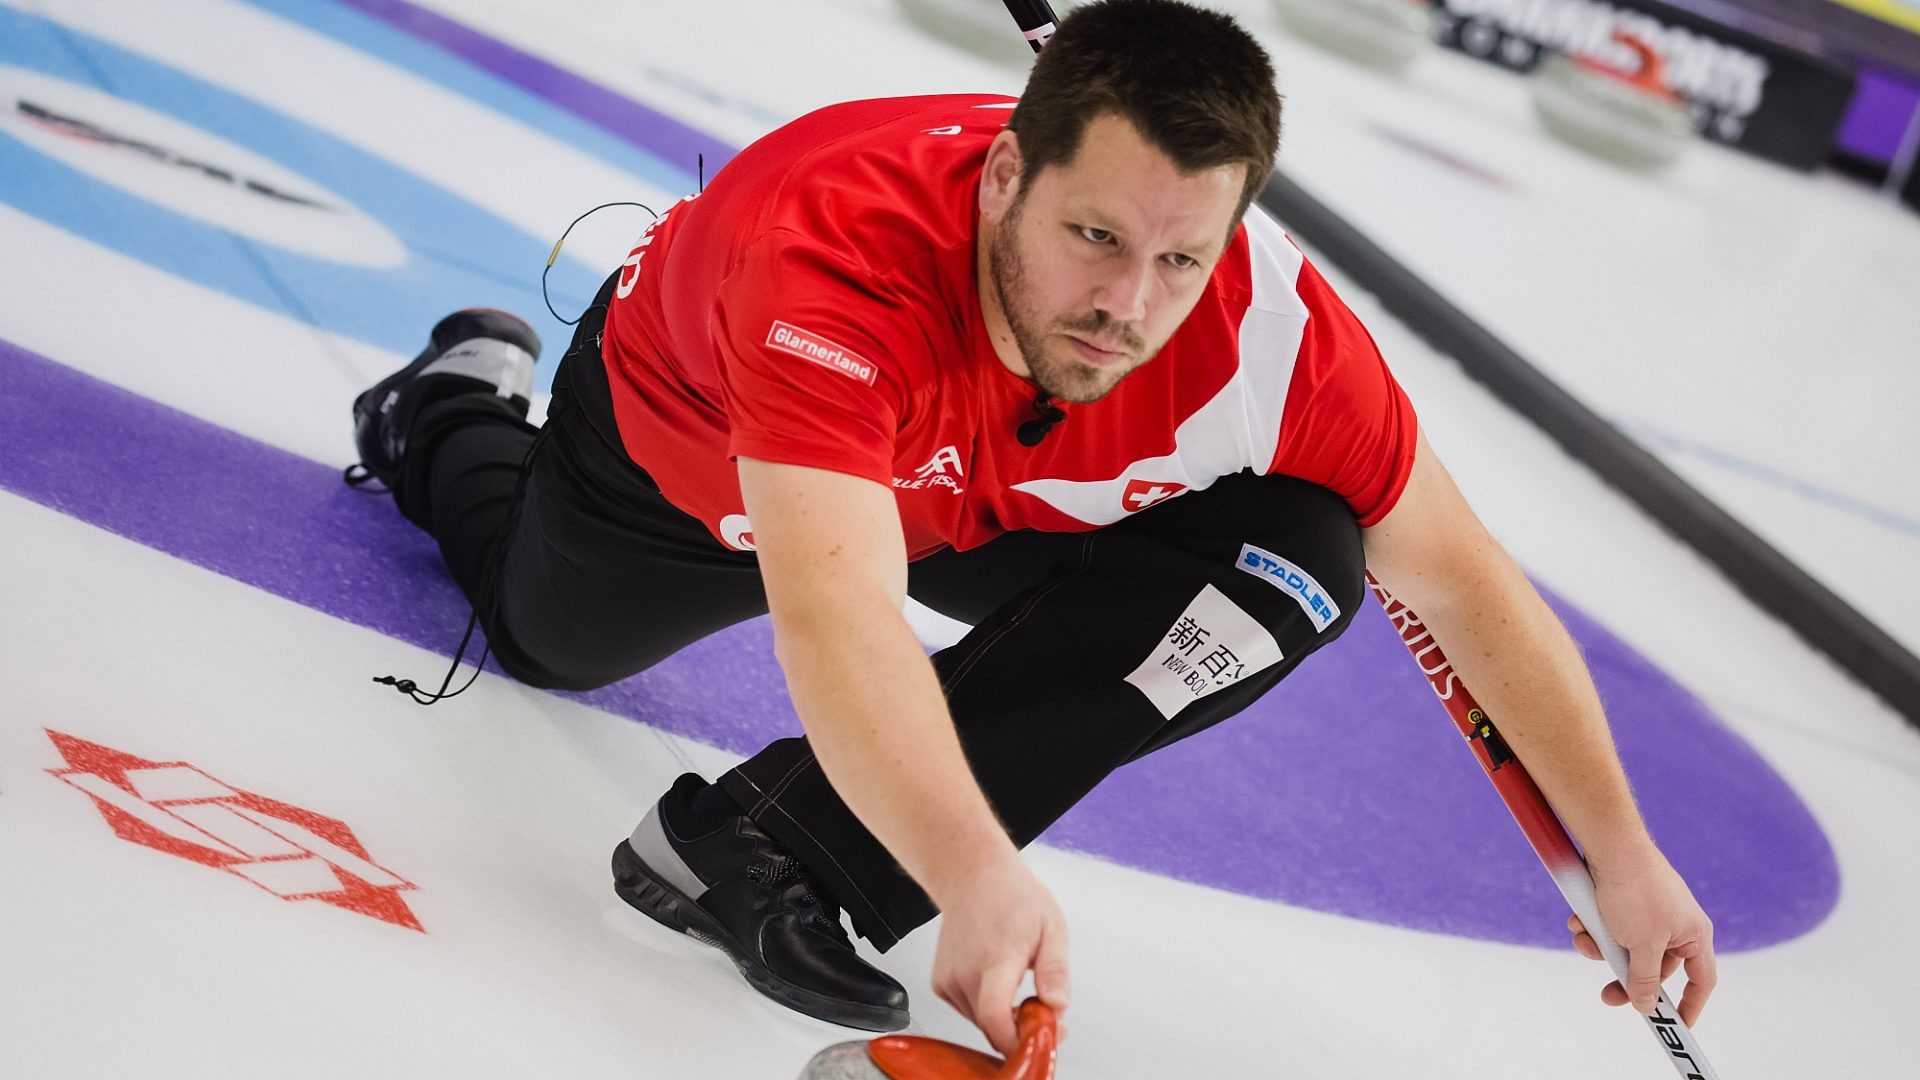 Switzerland's mixed doubles team first to qualify for finals of Curling World Cup